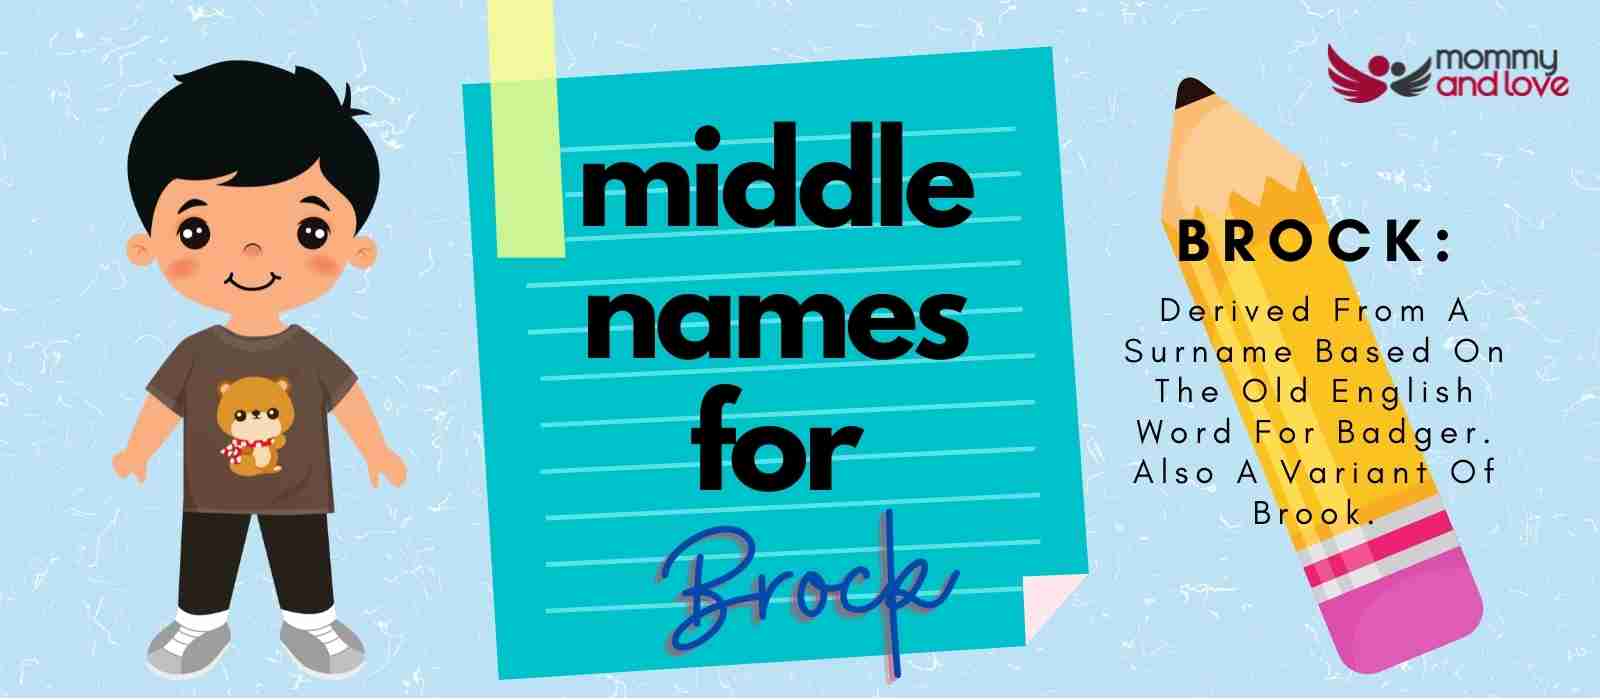 Middle Names for Brock